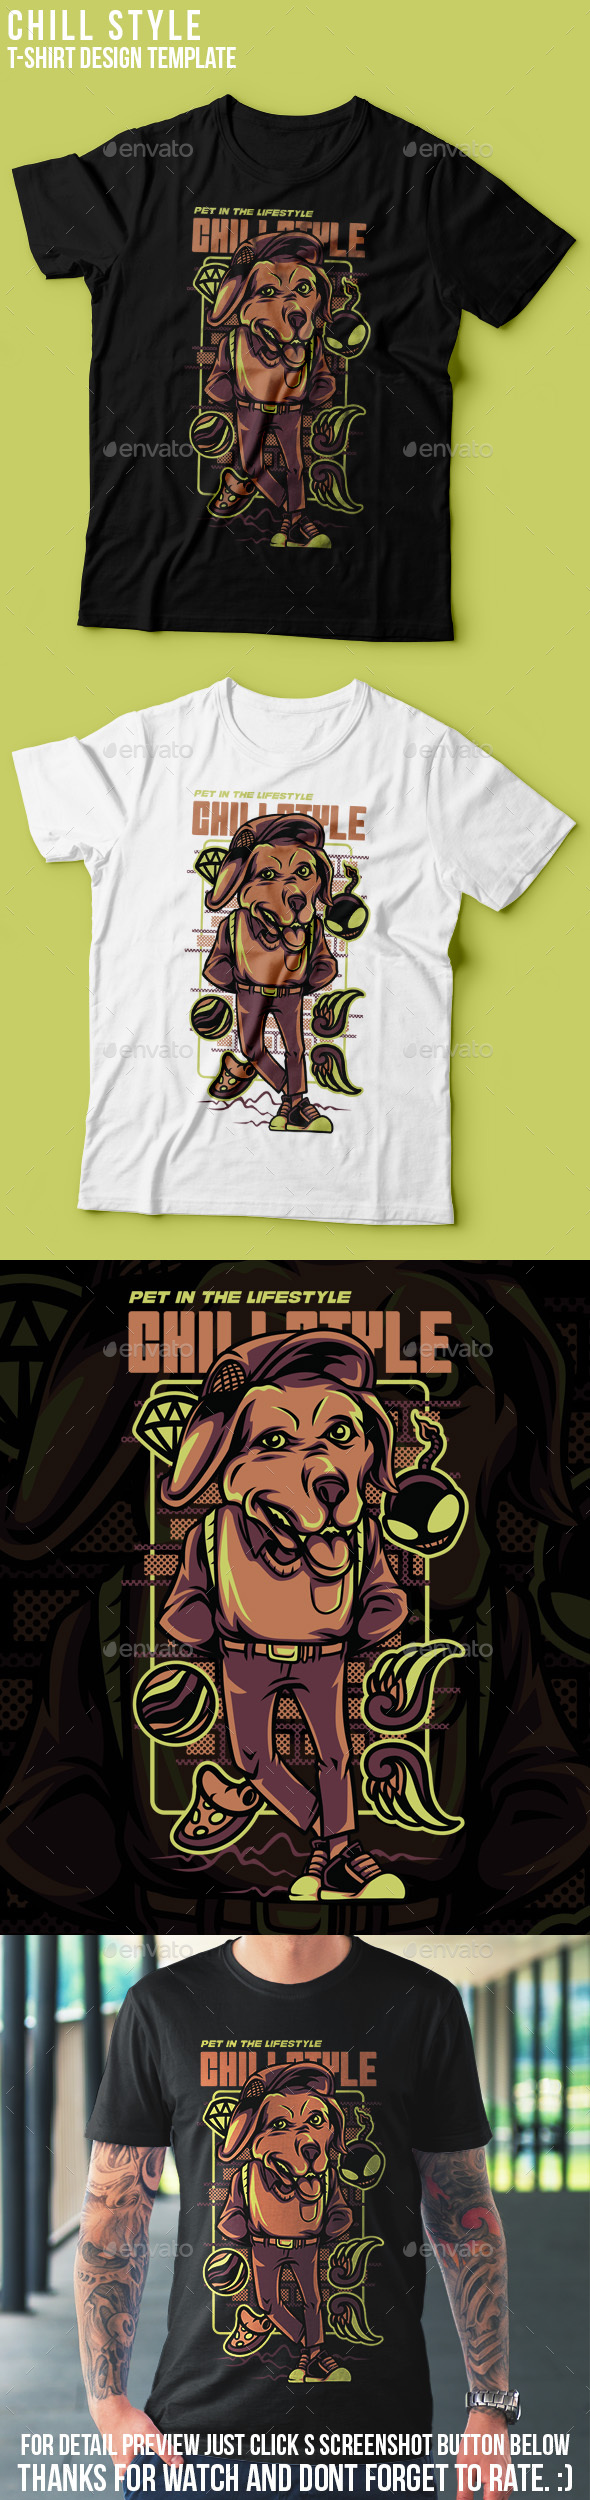 [DOWNLOAD]Chill Style T-Shirt Design